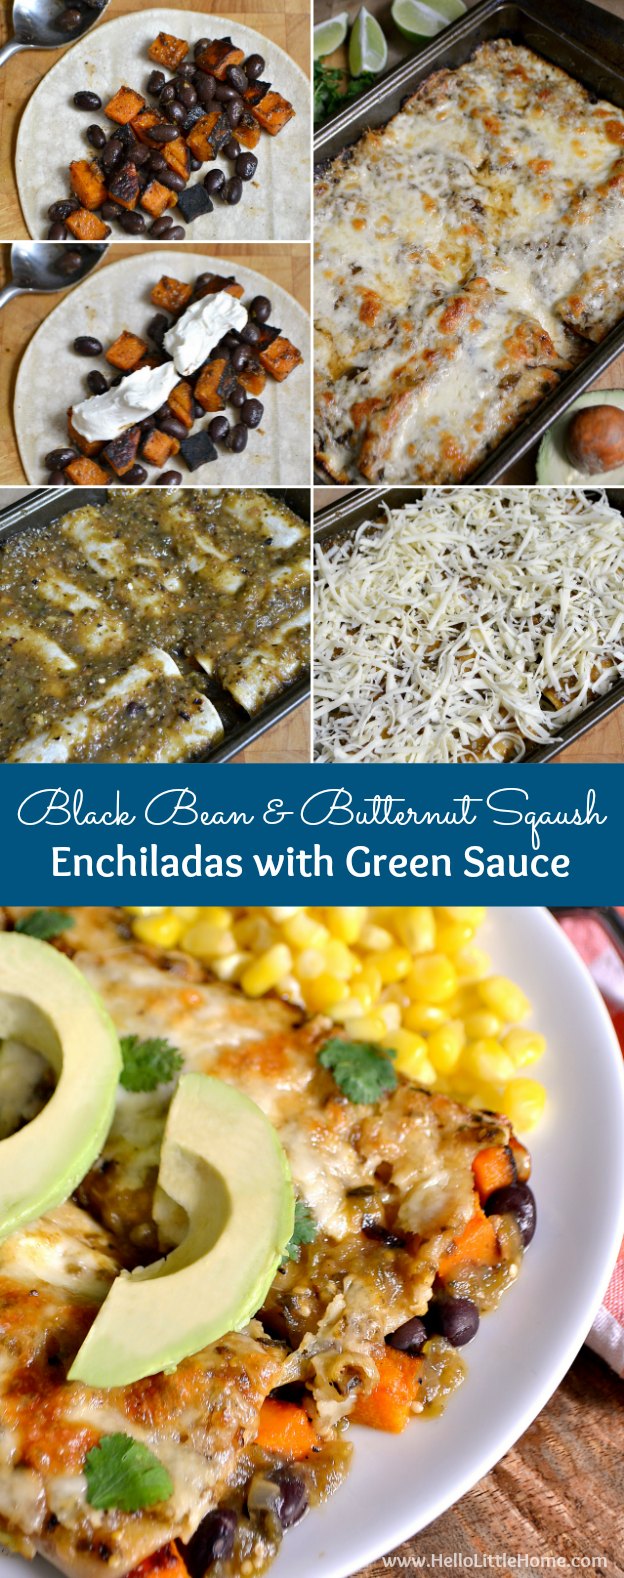 Feed a crowd with these decadent and delicious Black Bean and Butternut Squash Enchiladas with Green Sauce! | Hello Little Home